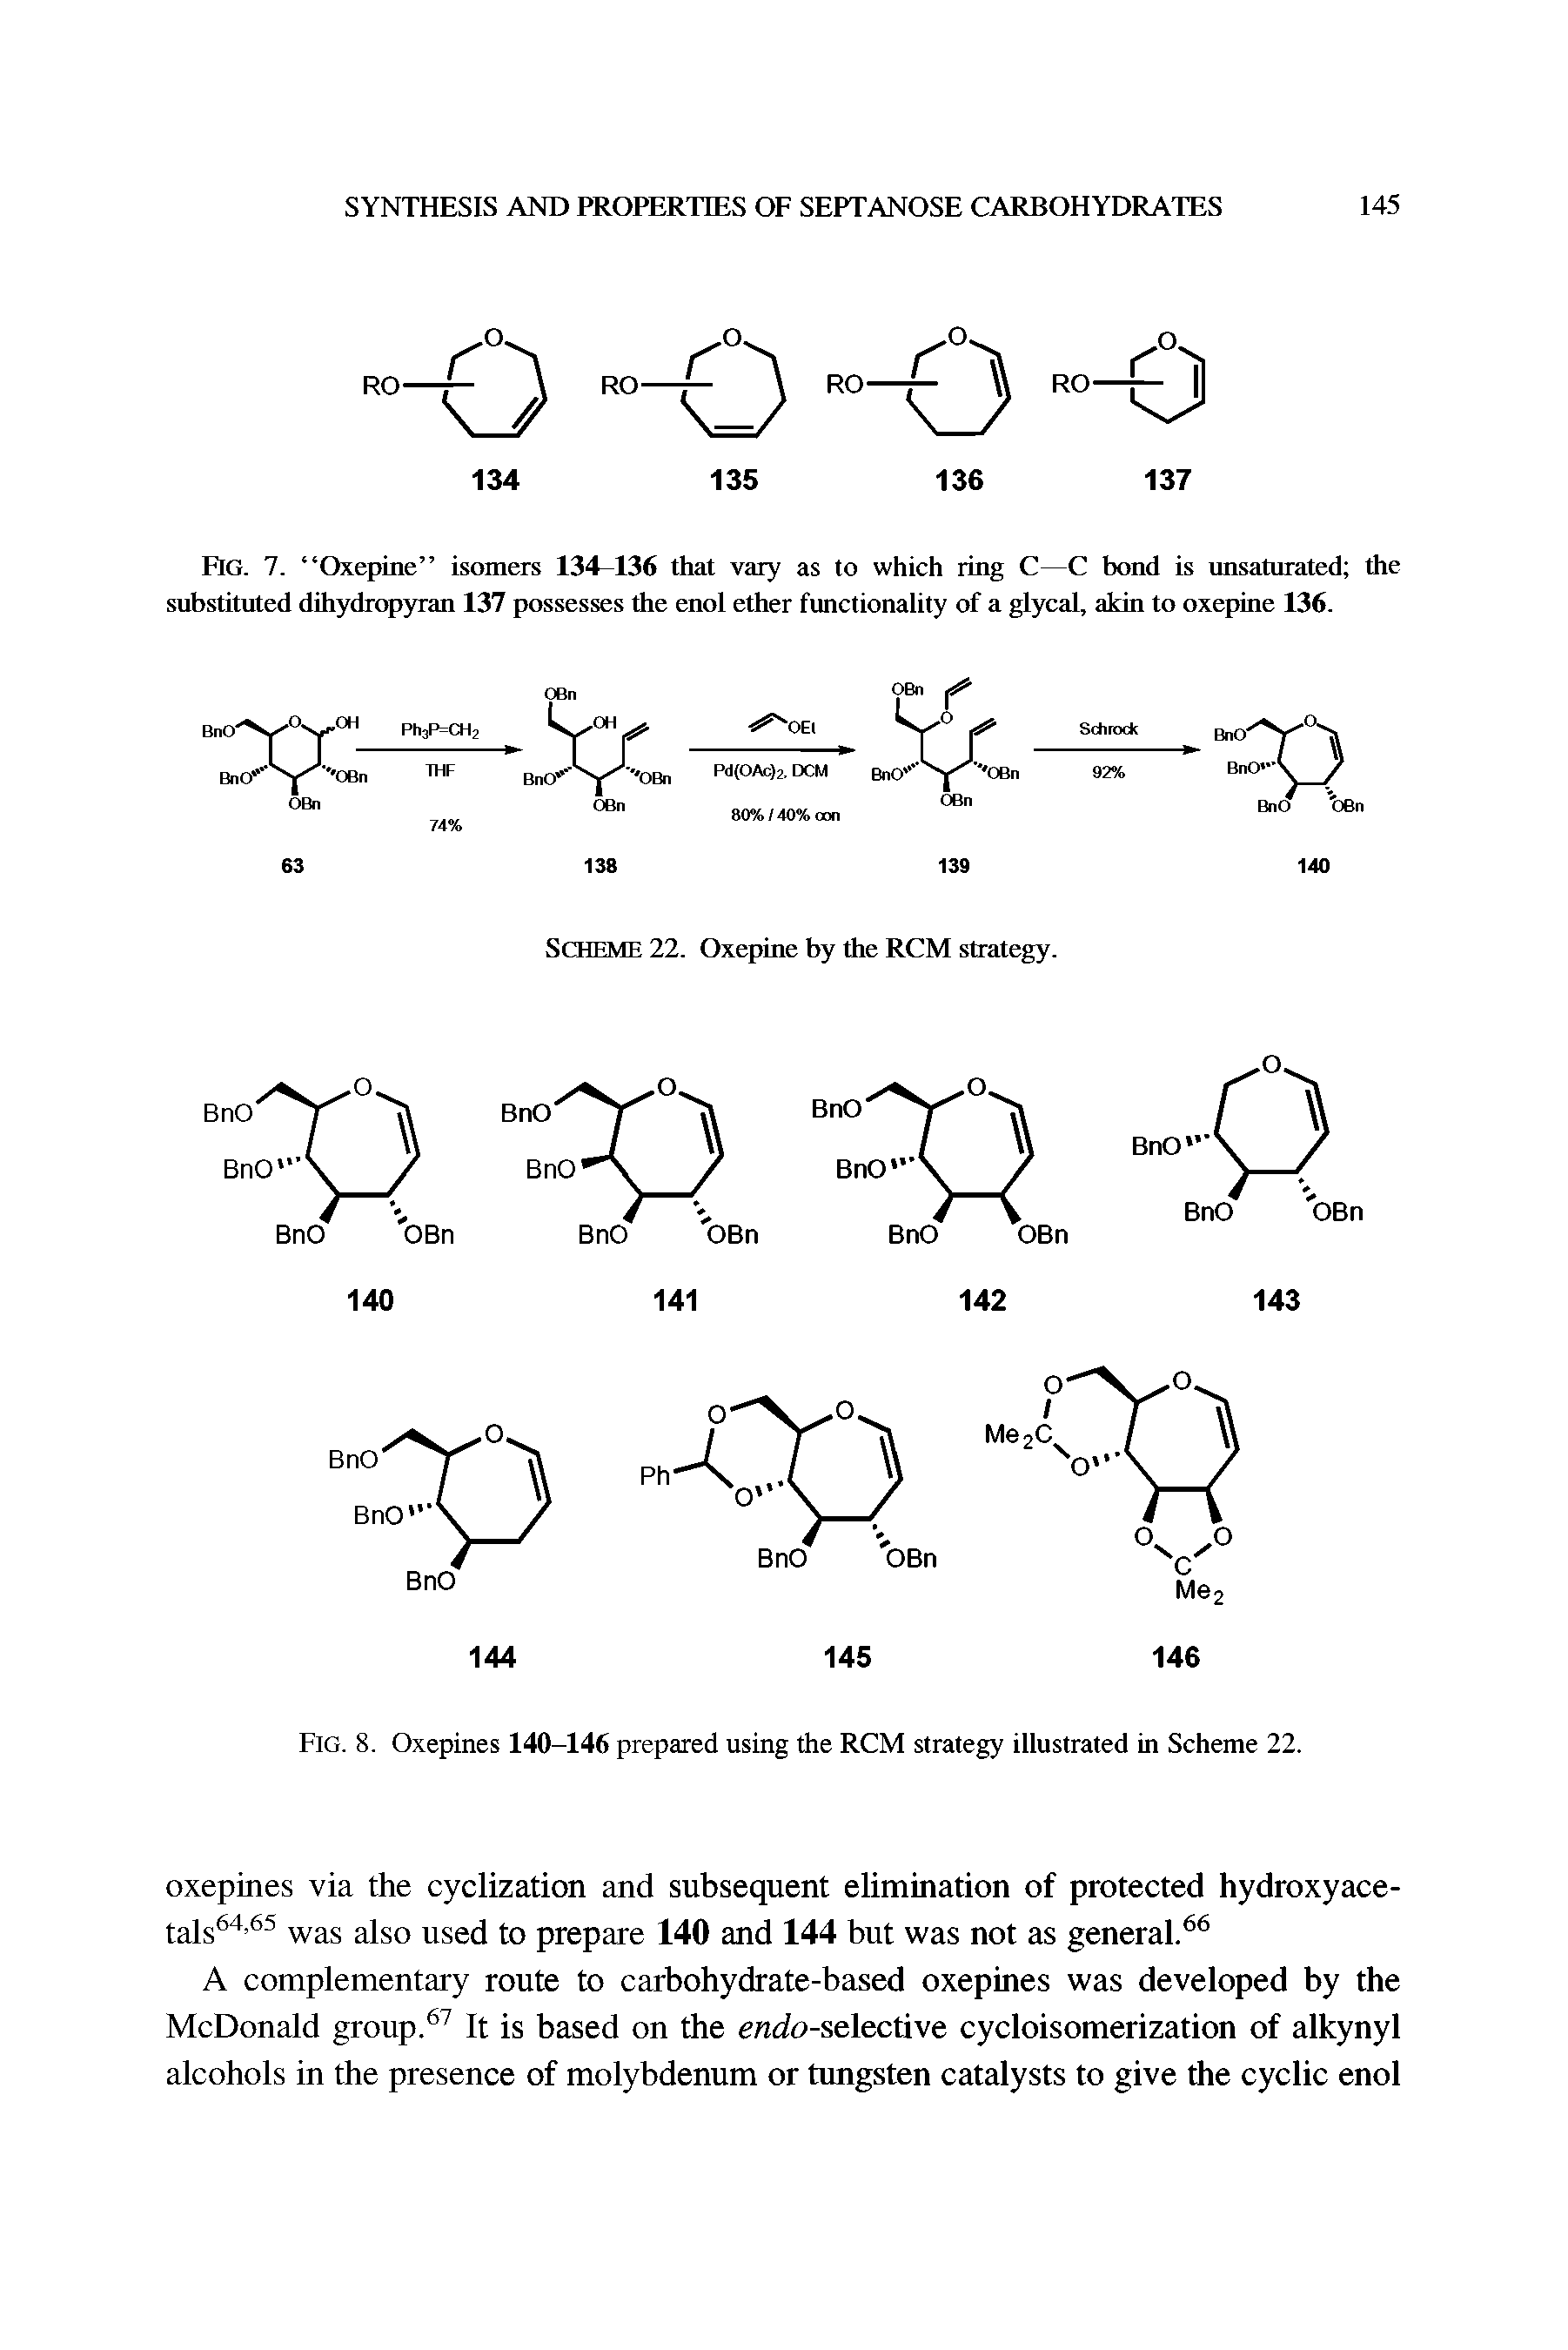 Fig. 7. Oxepine isomers 134-136 that vary as to which ring C—C bond is unsaturated the substituted dihydropyran 137 possesses the enol ether functionality of a glycal, akin to oxepine 136.